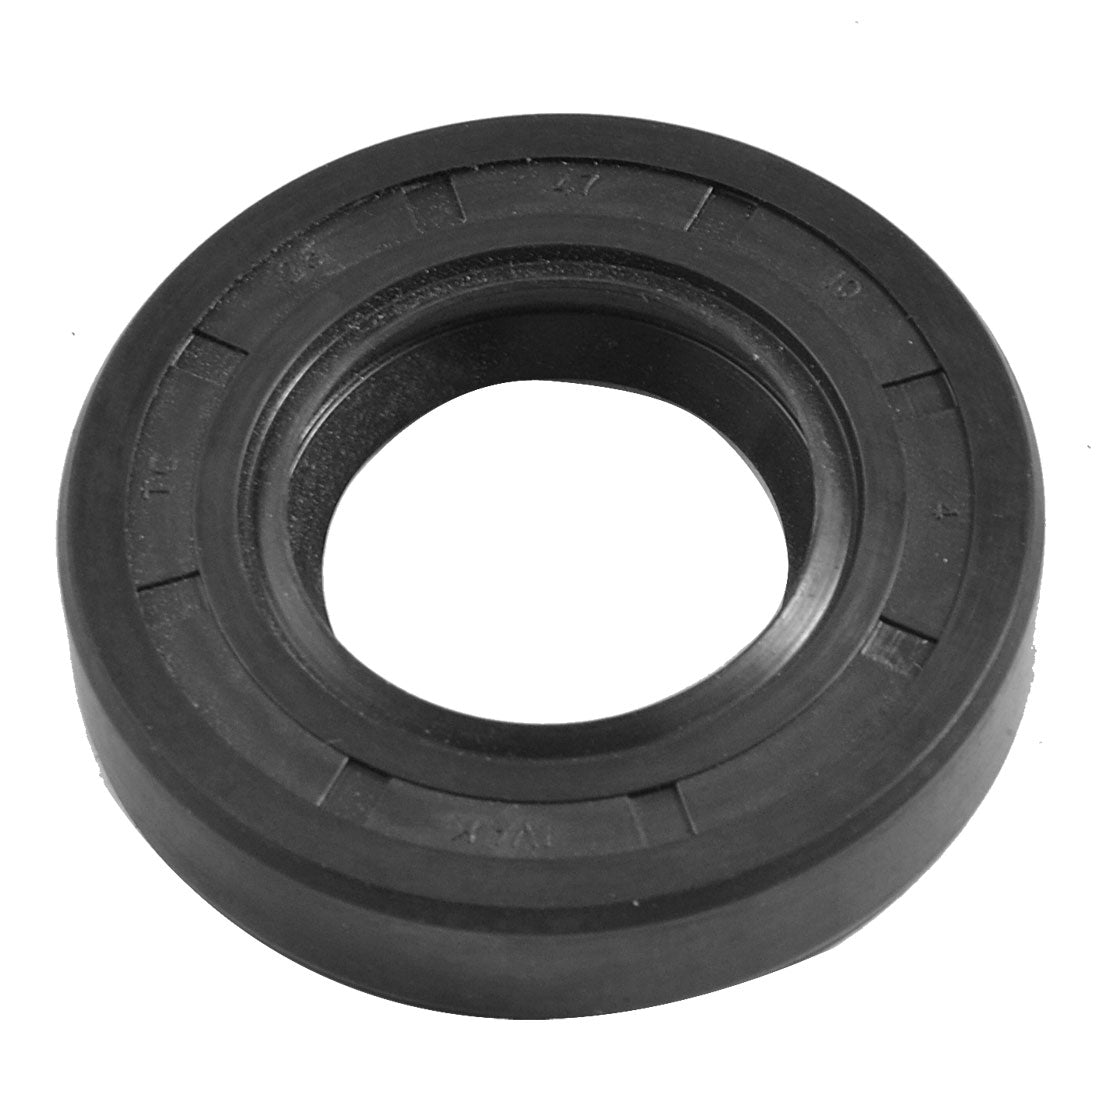 Uxcell Uxcell 110mmx85mmx10mm Machine Rubber Oil Seal Sealing Ring Gasket Washer Black